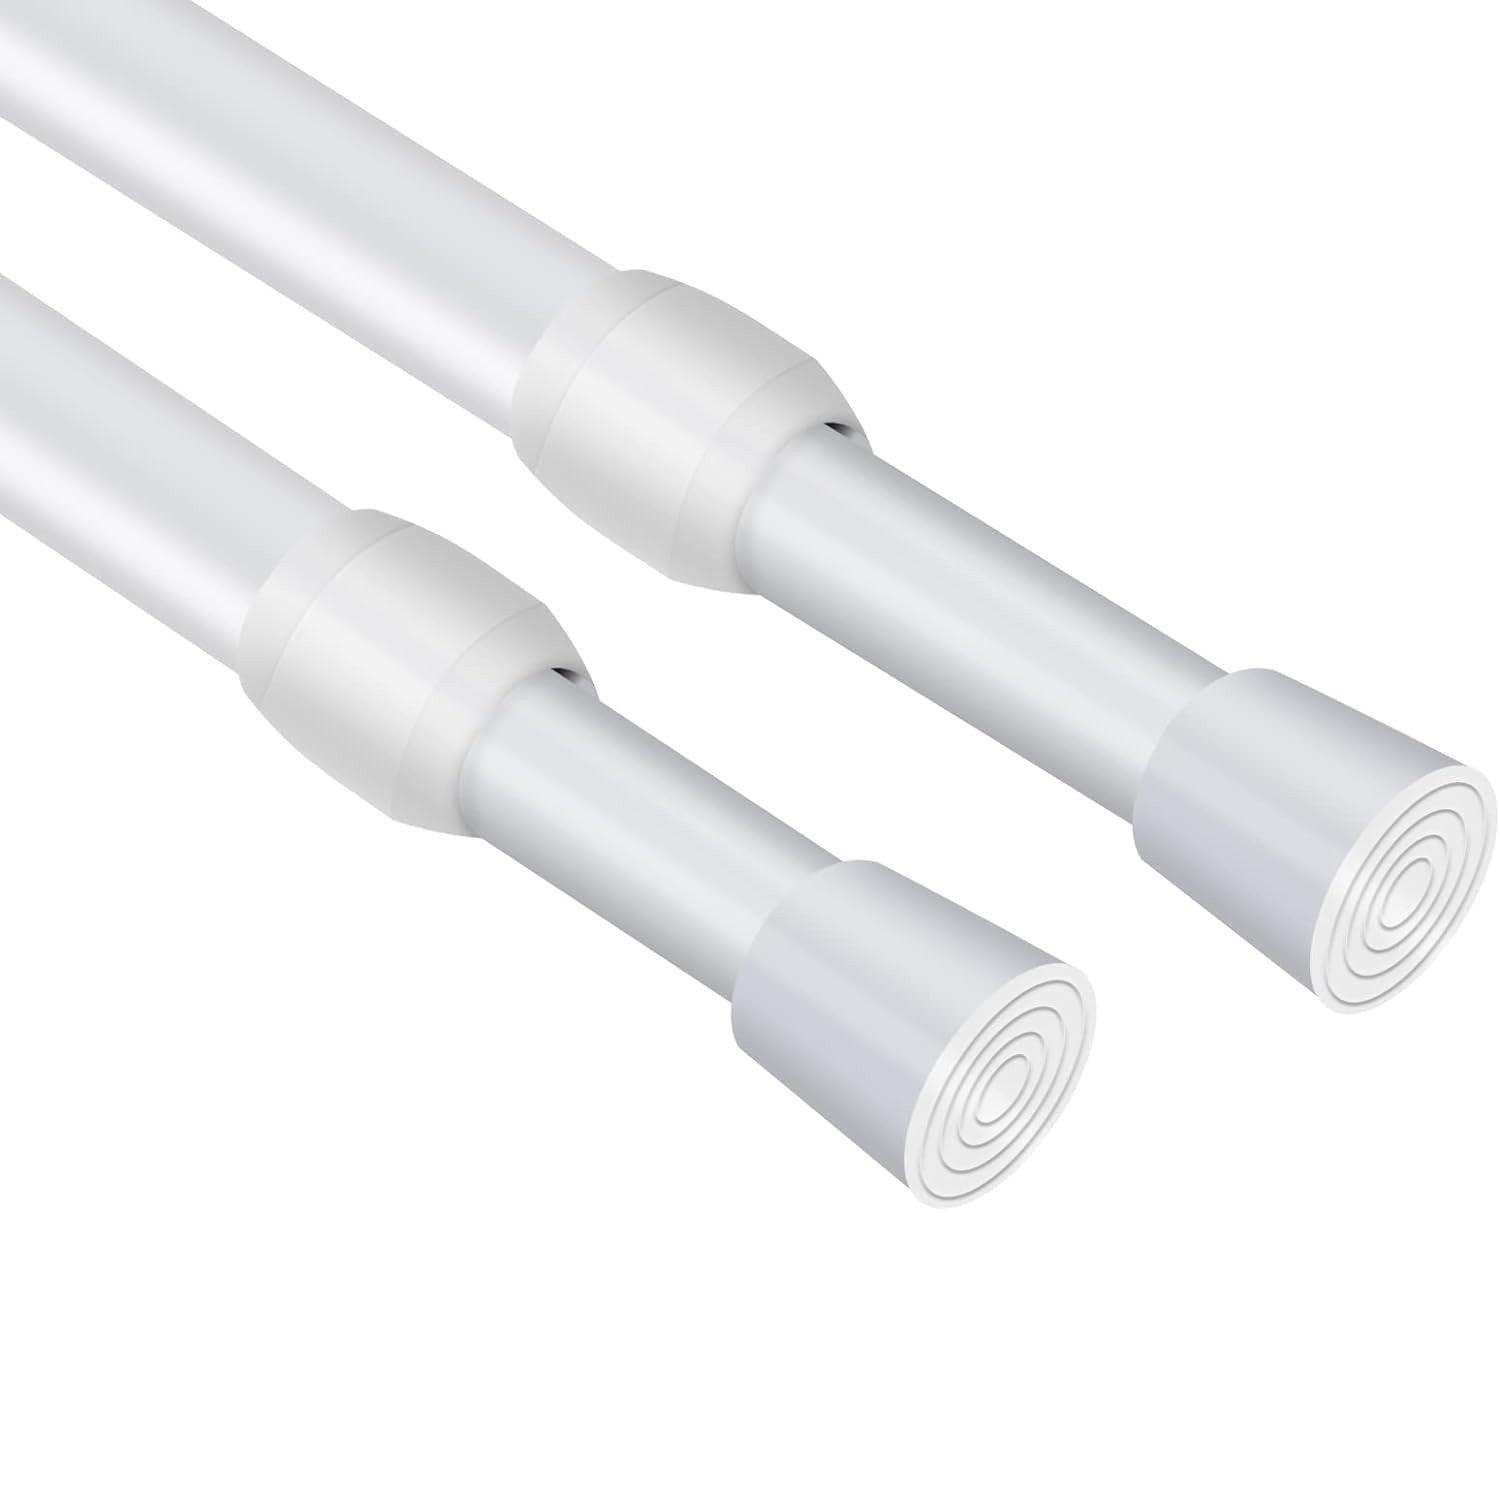 Extendable Curtain Poles 83-150cm Tension Mounted Rods No Drill 2 pack - Massive Discounts